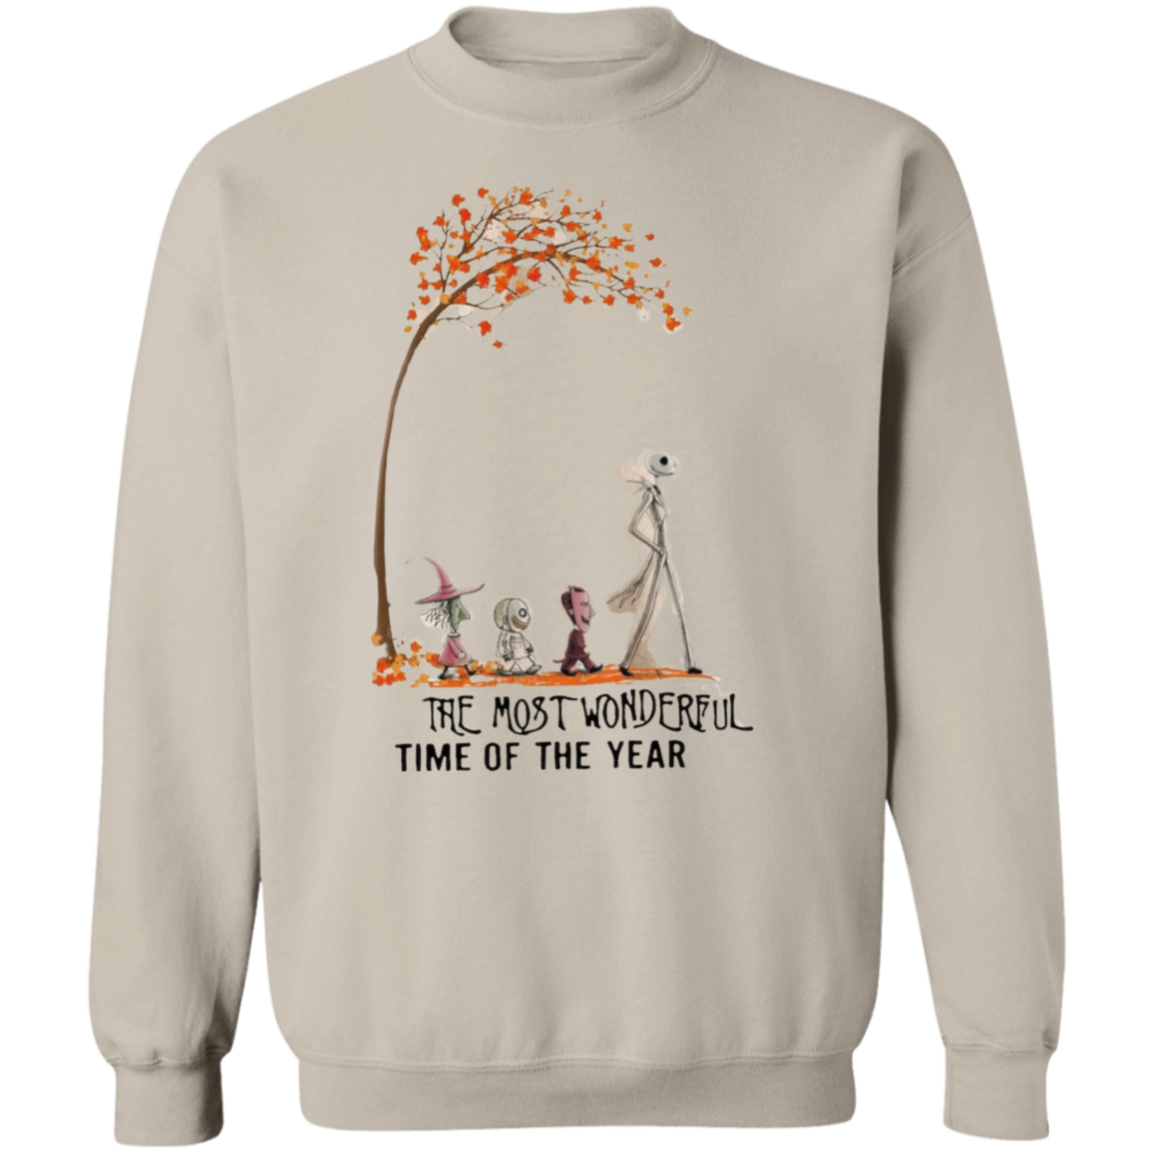 The Most Wonderful Time of the Year! Halloween Sweatshirt